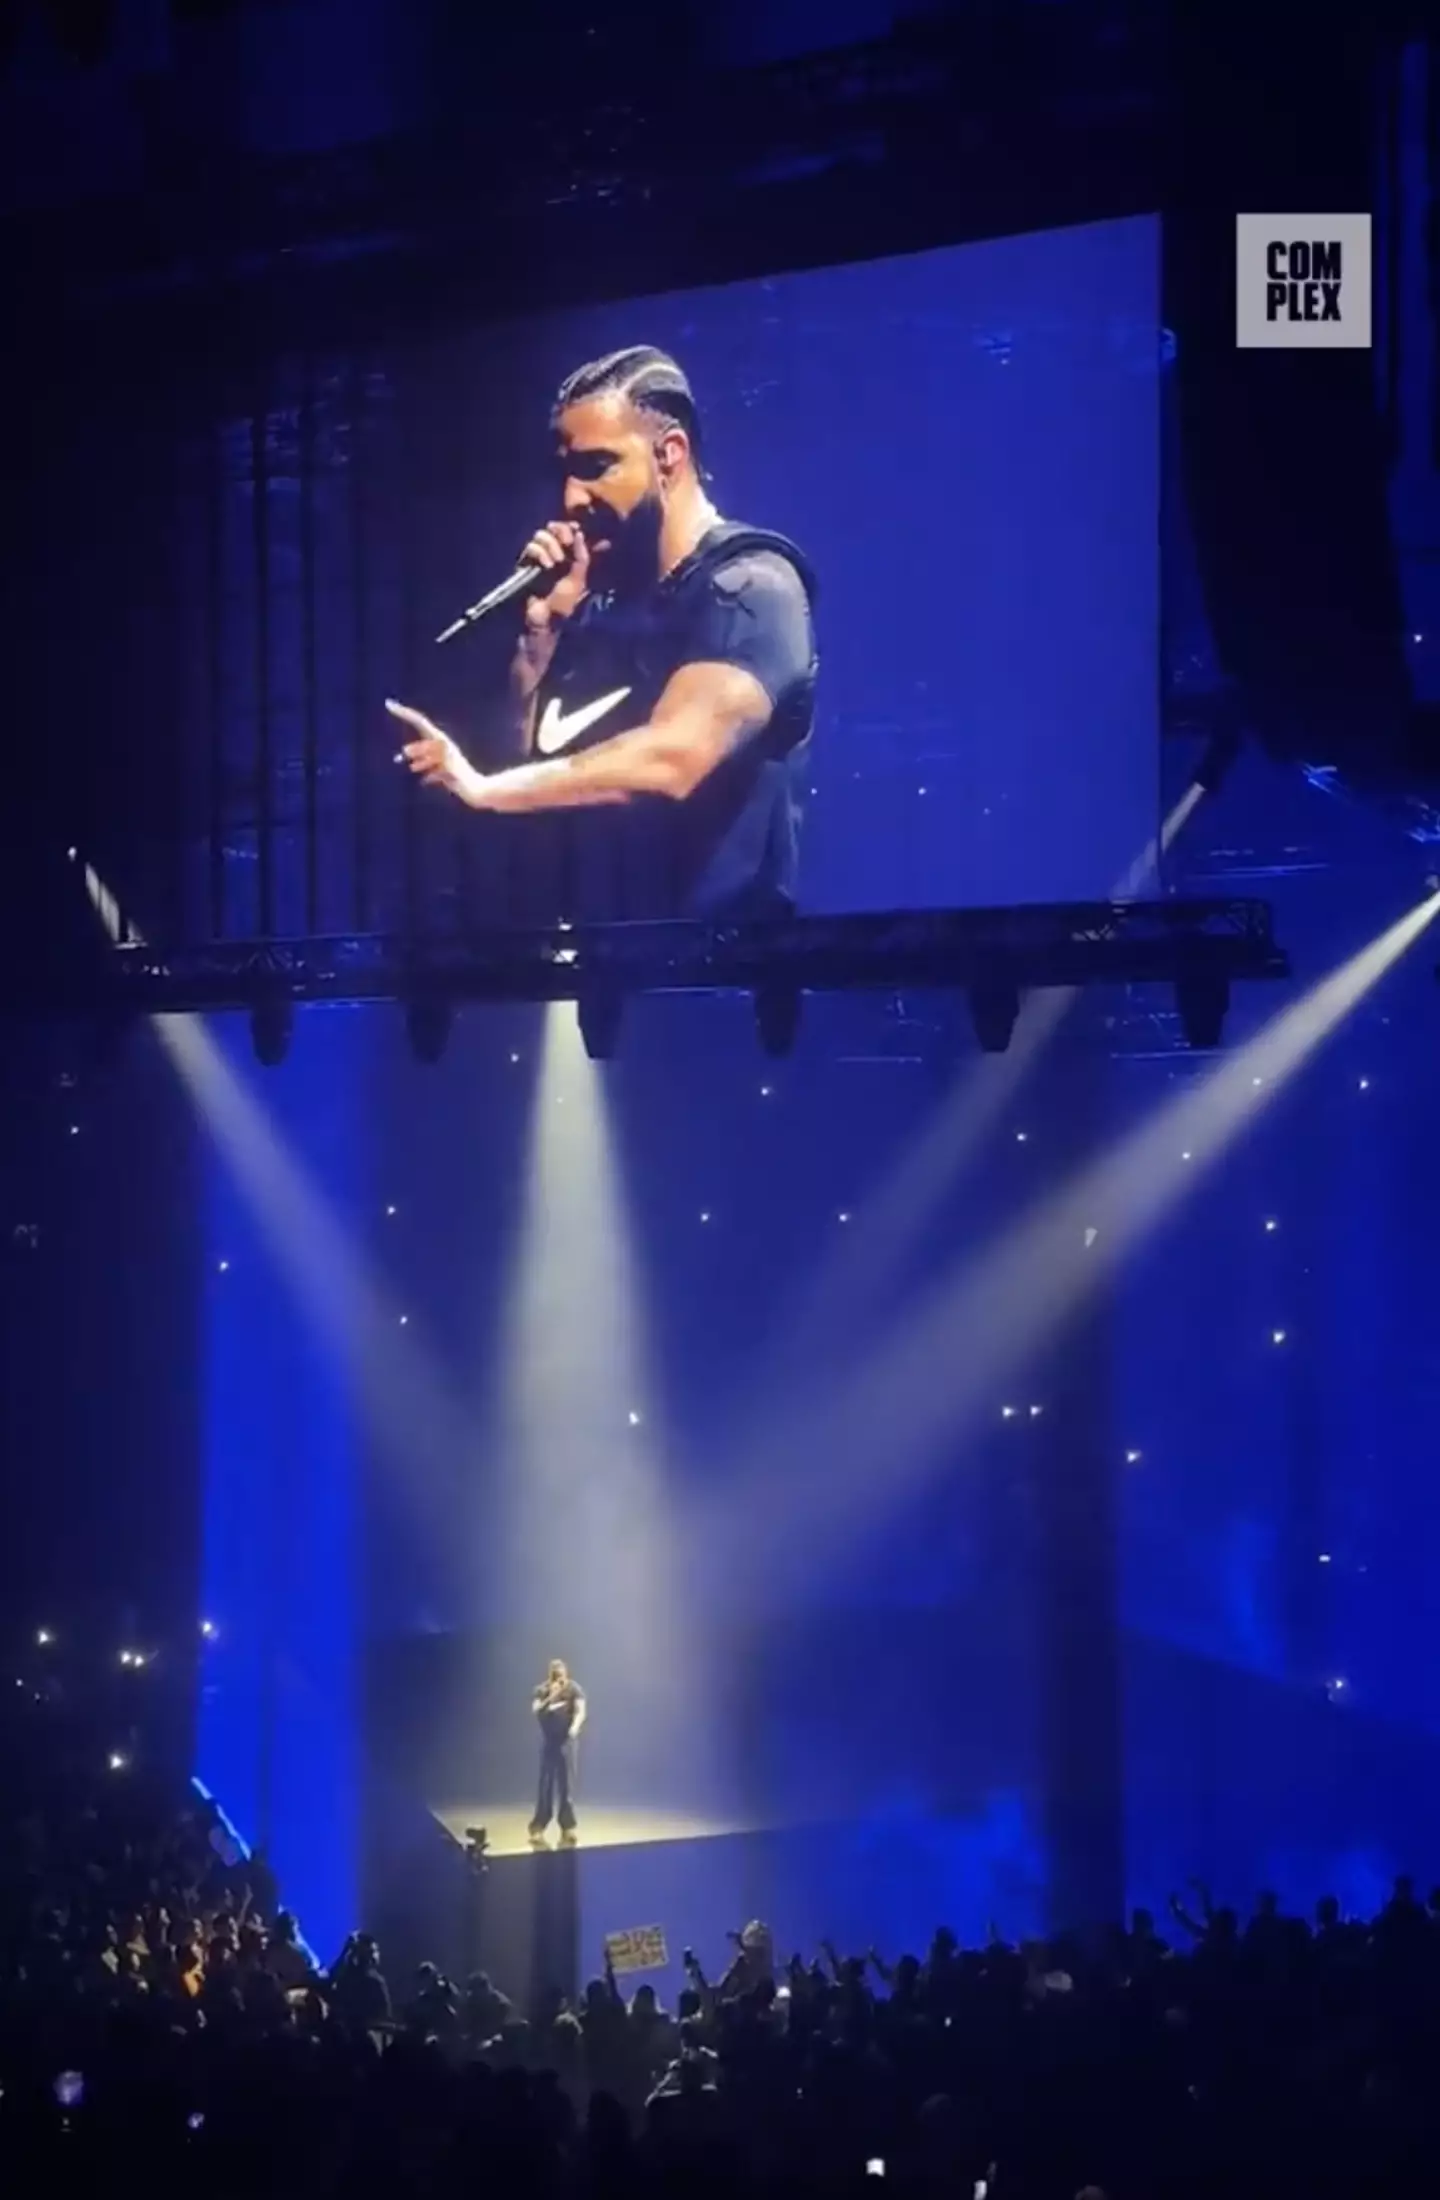 The rapper addressed a fan in the audience.